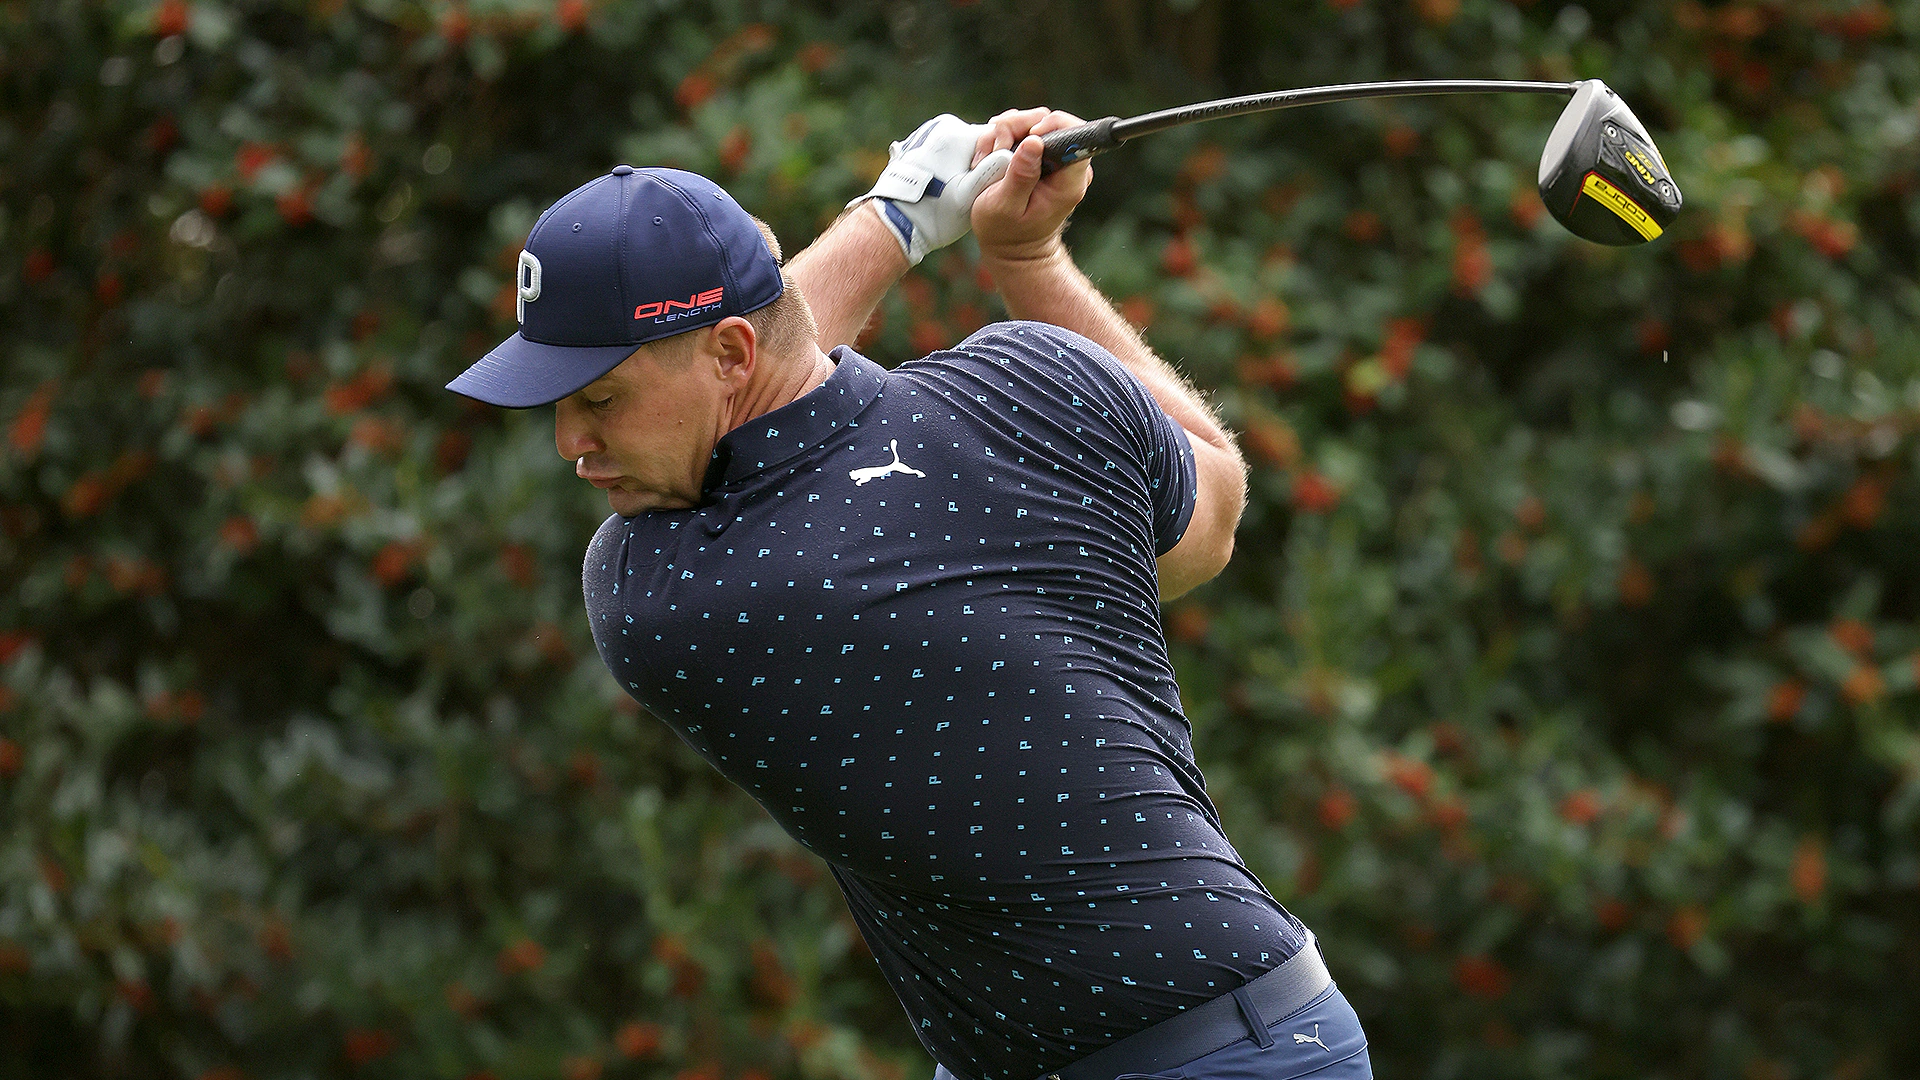 On eve of 2020 Masters, Bryson DeChambeau still tinkering with 48-inch driver